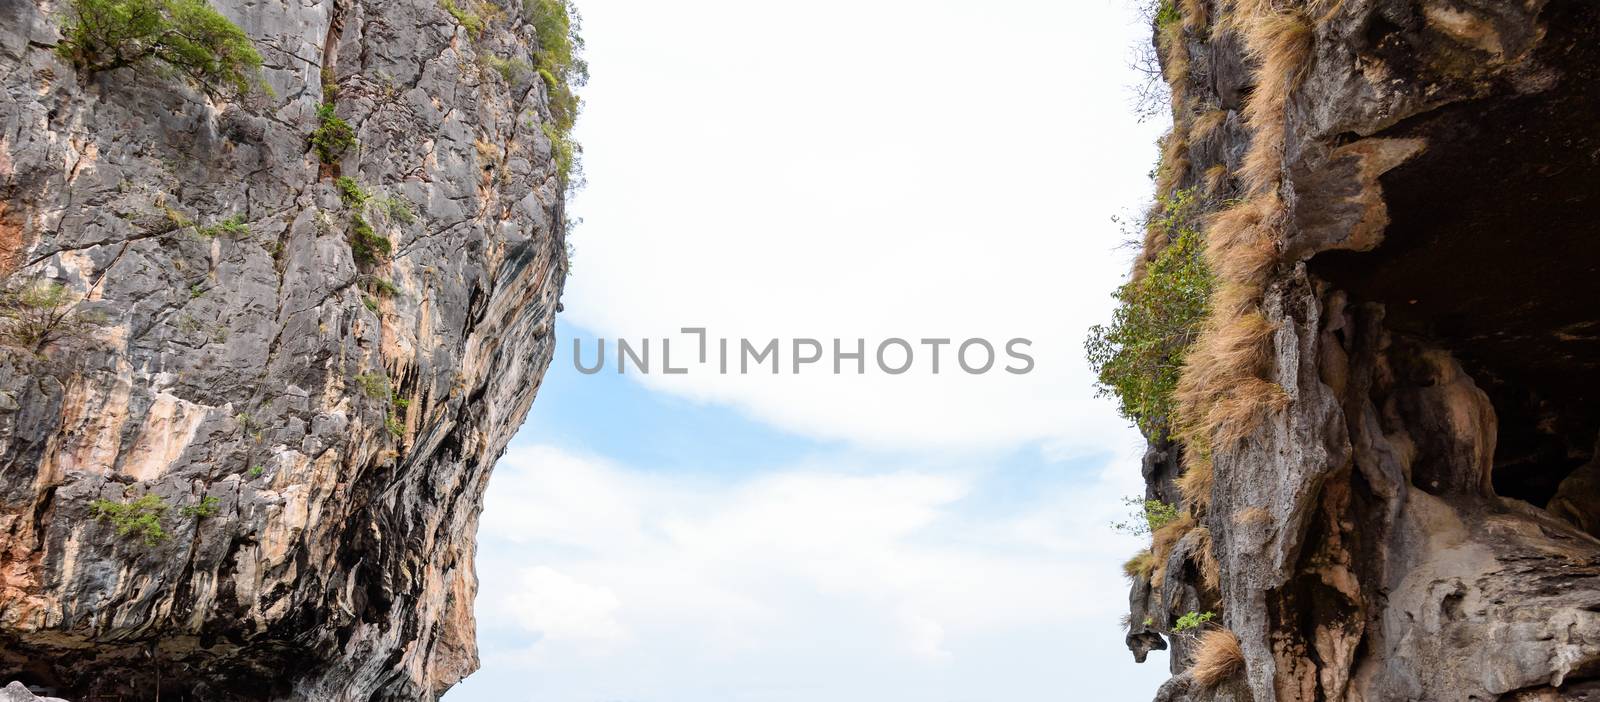 Two stone cliff with a space middle and see the sky